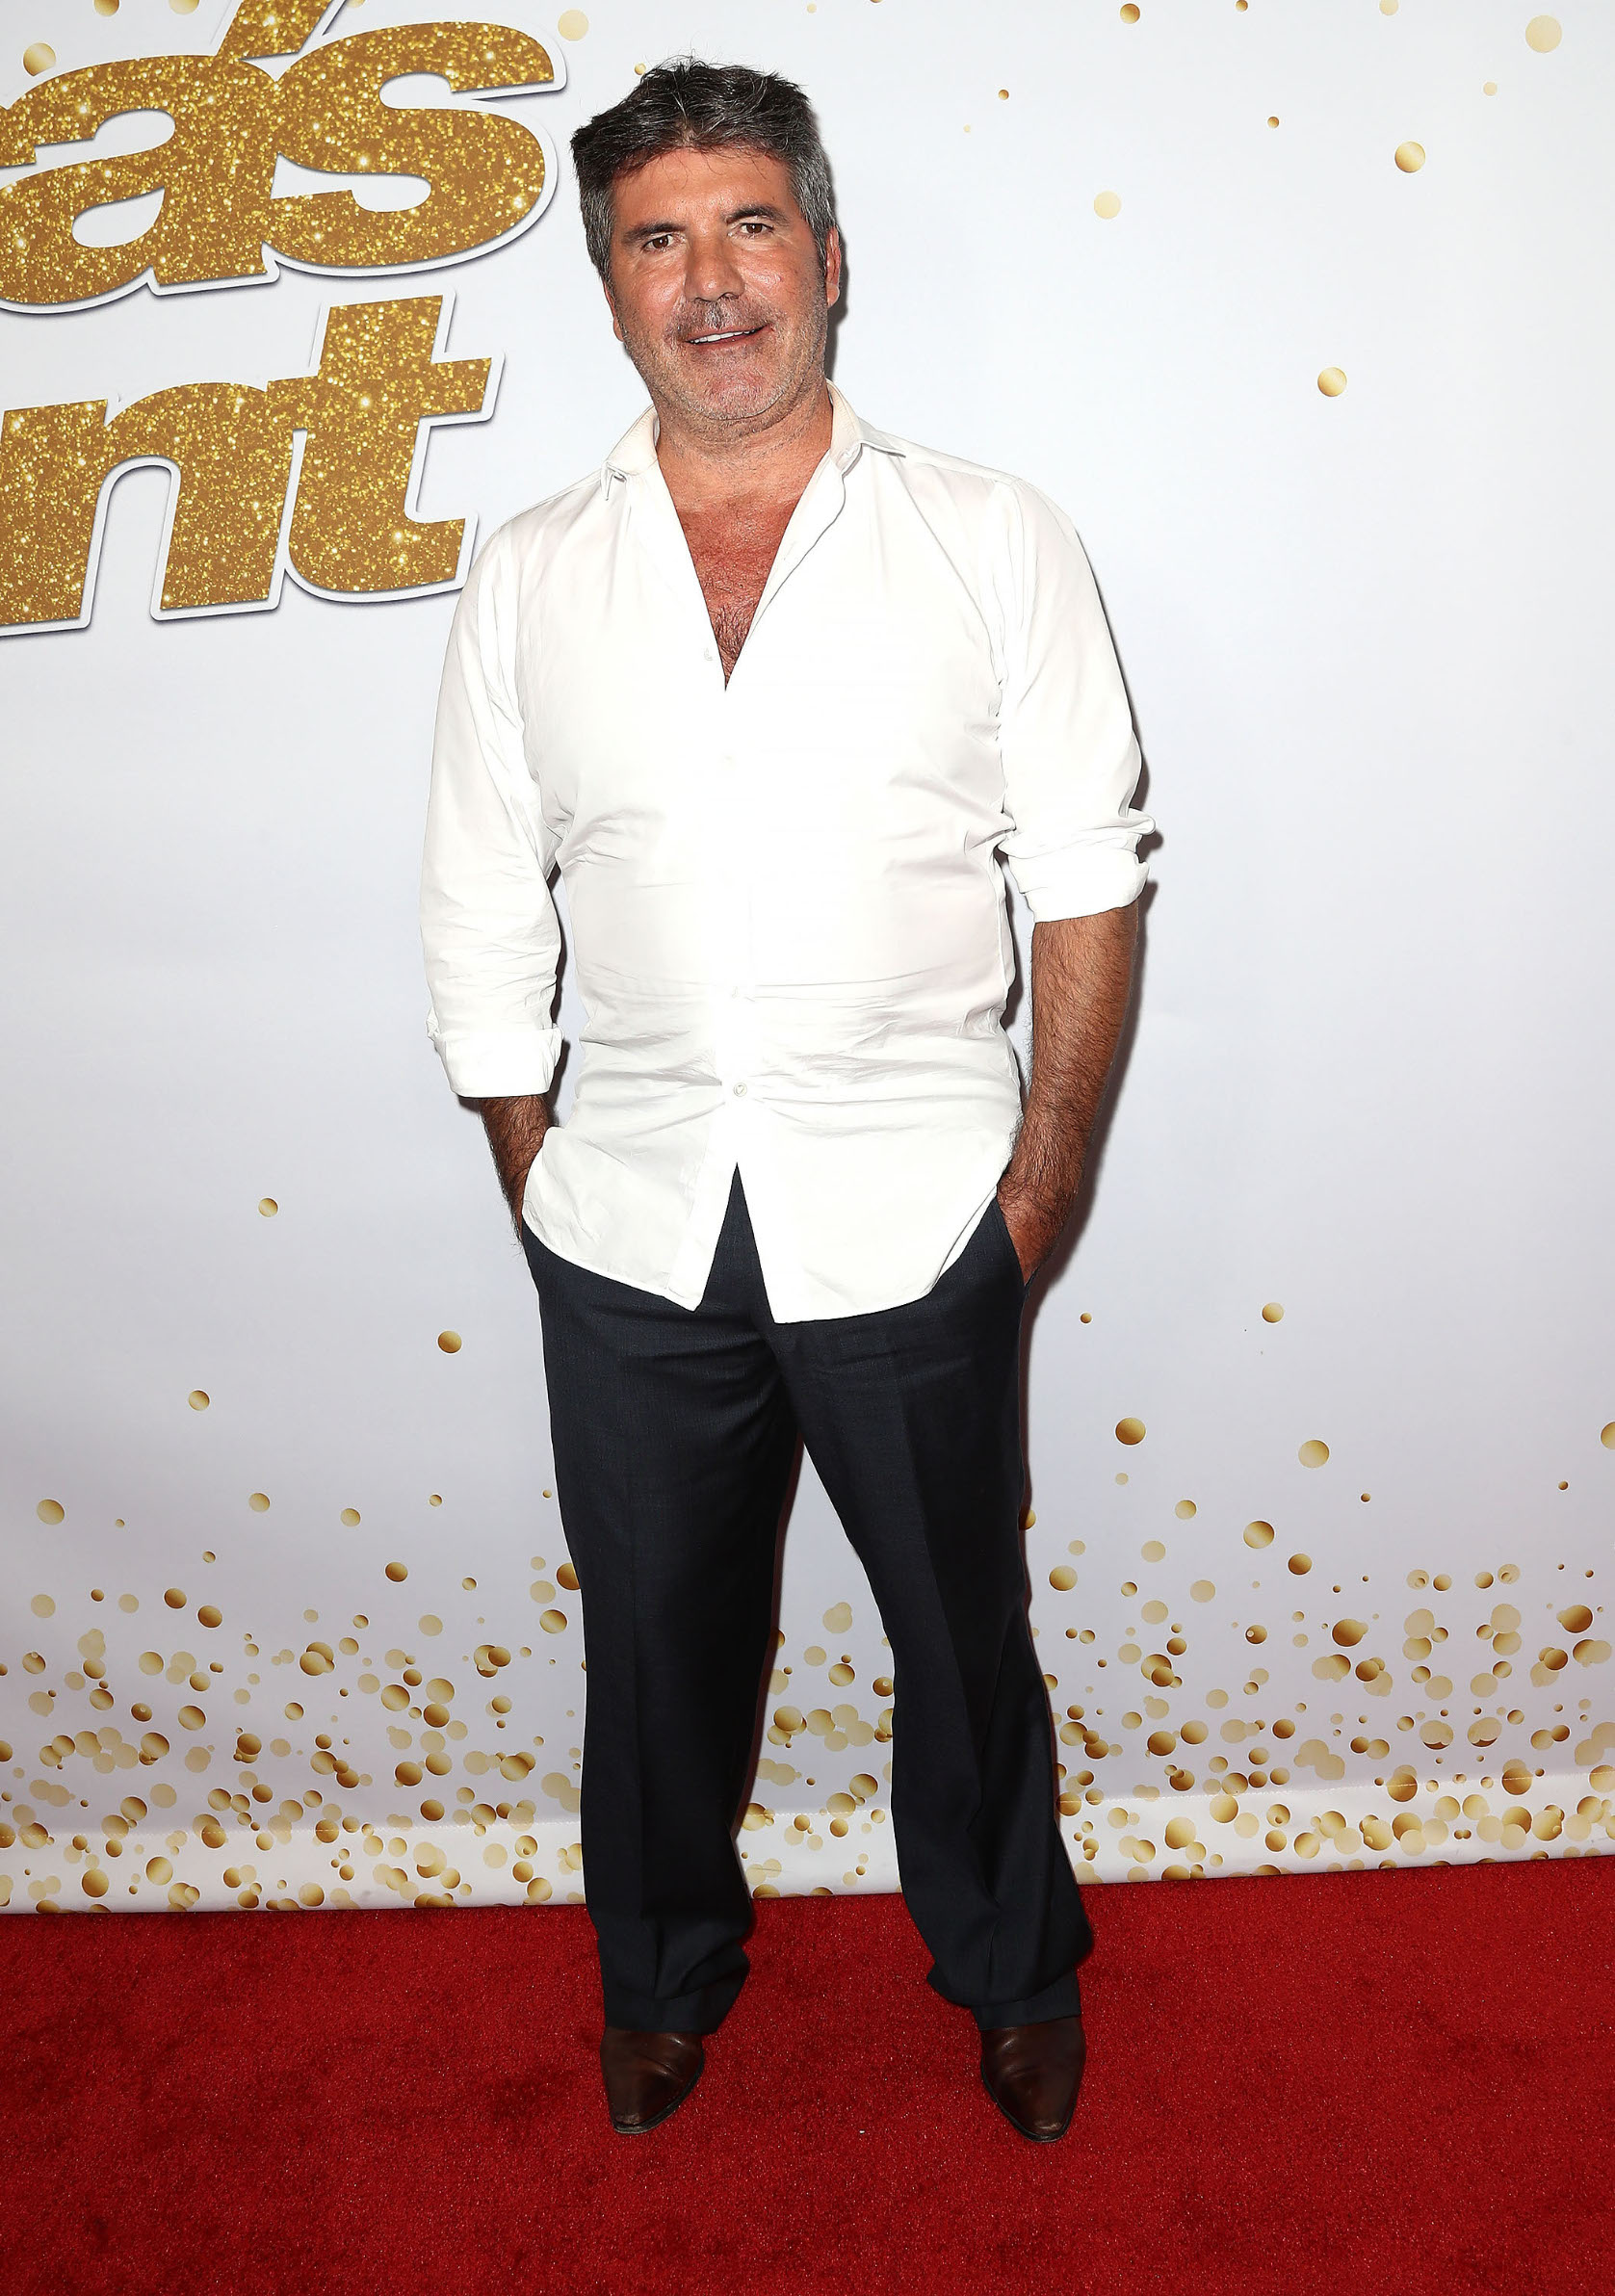 HOLLYWOOD, CA - SEPTEMBER 18: Simon Cowell attends the 